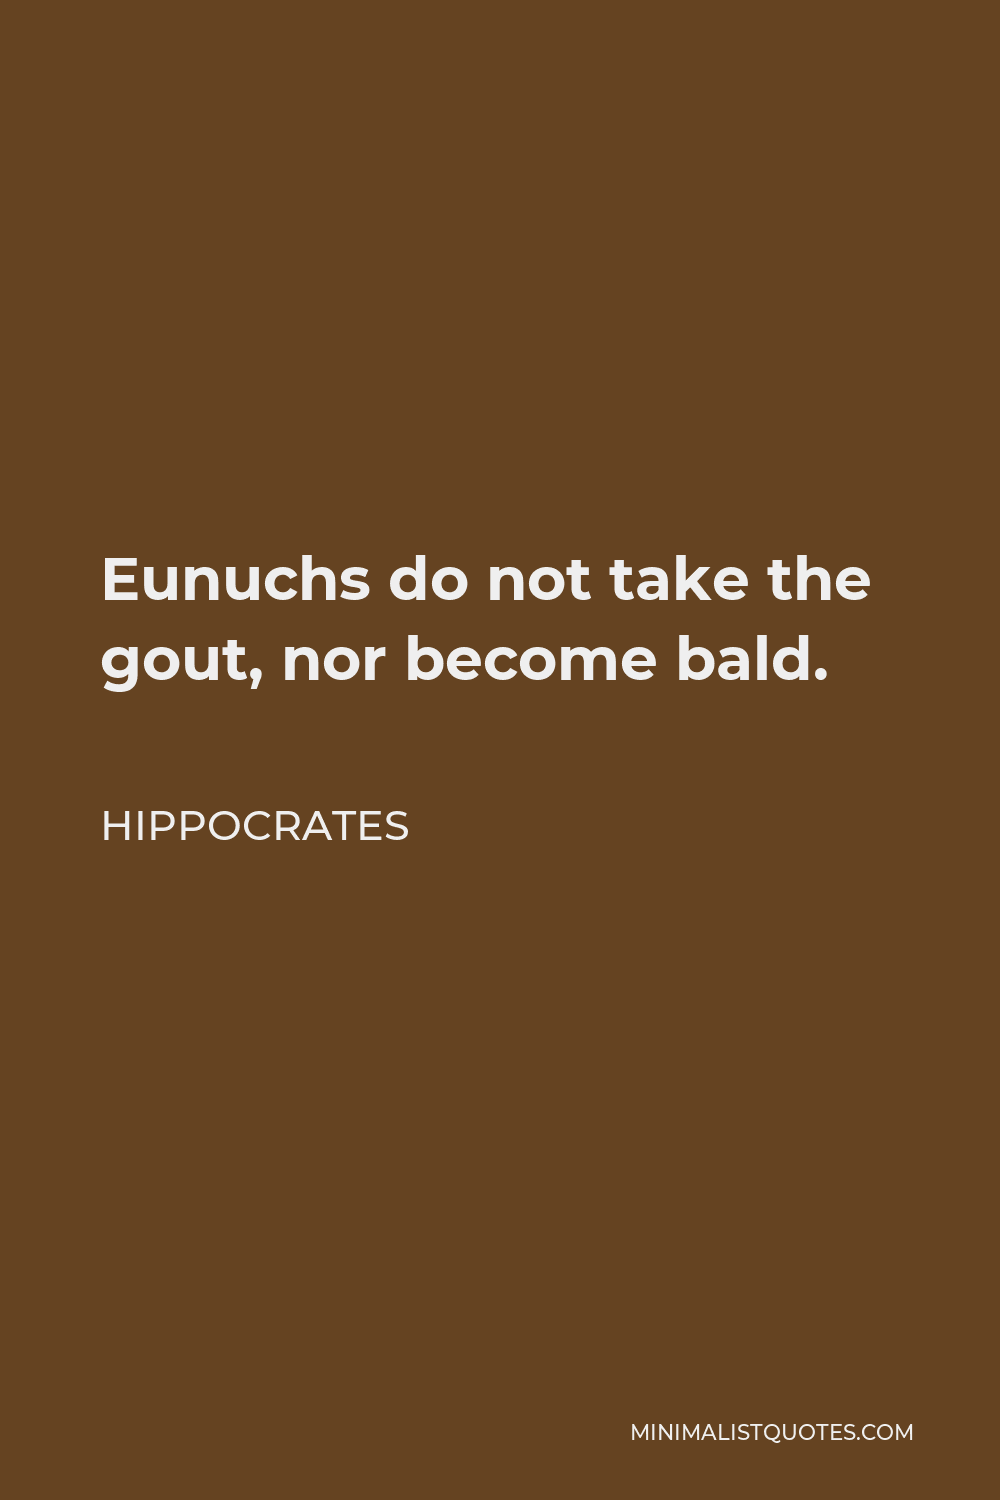 Hippocrates Quote - Eunuchs do not take the gout, nor become bald.